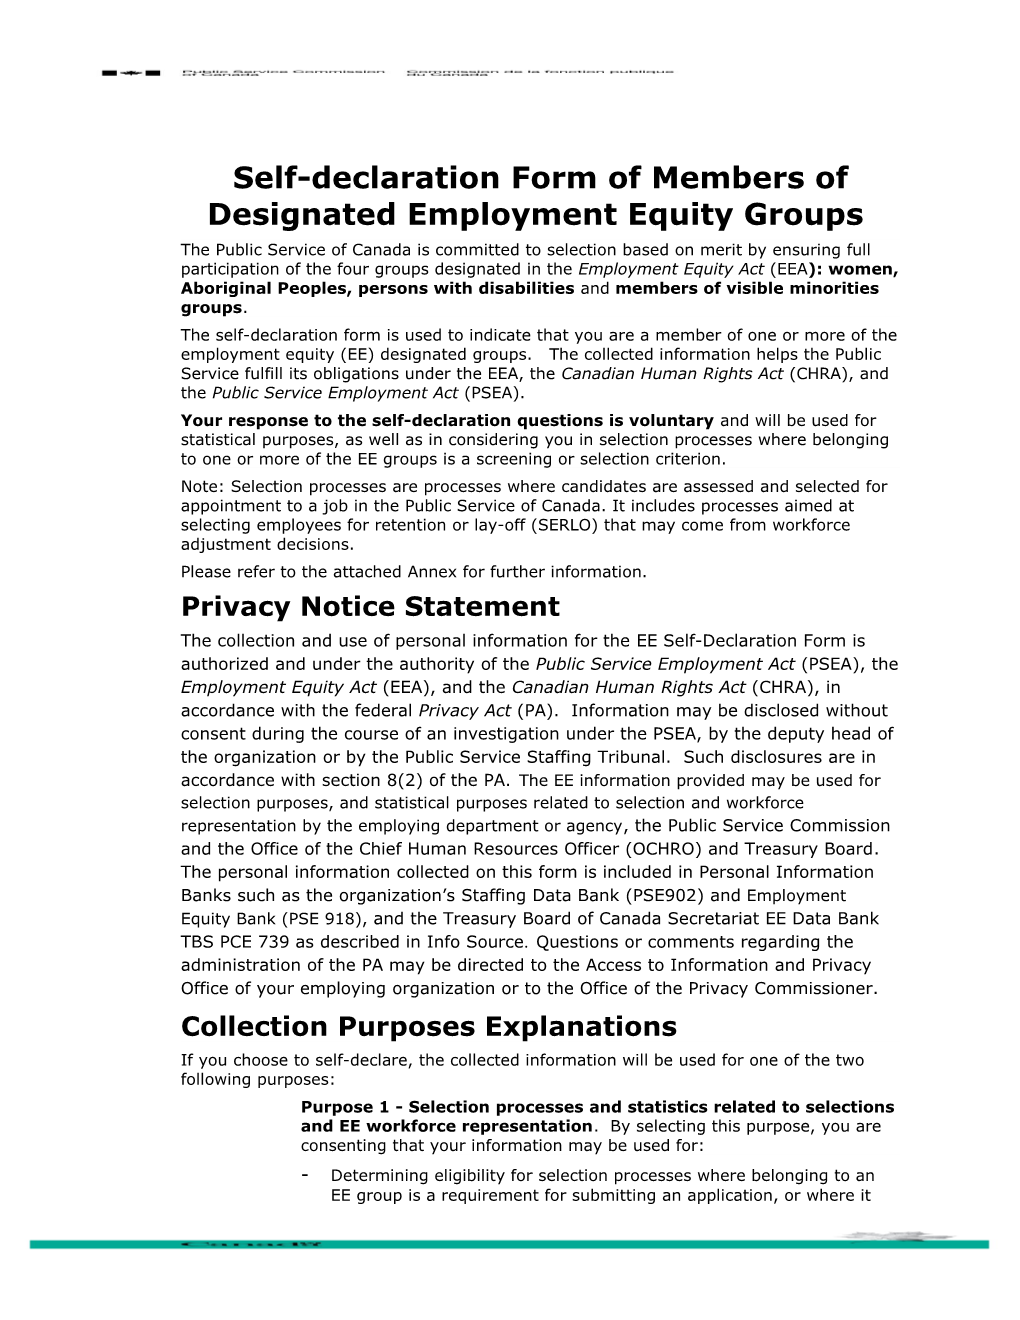 Self-Declaration F Orm of Members of Designated Employment Equity Groups